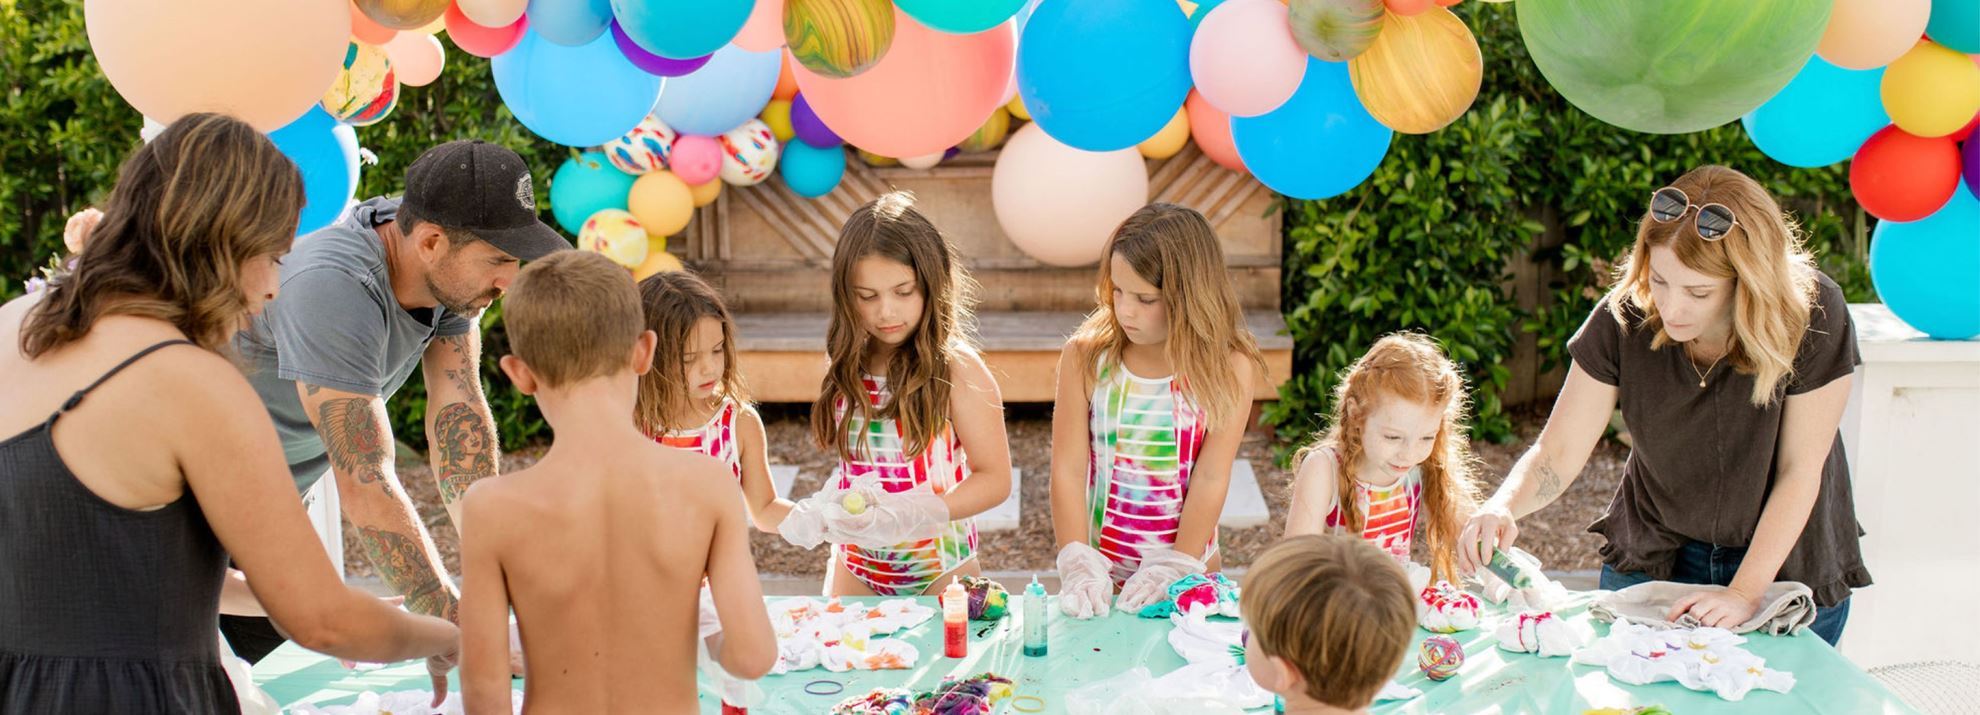 How to Create an Easy Tie-Dye Party for Kids using these Printable